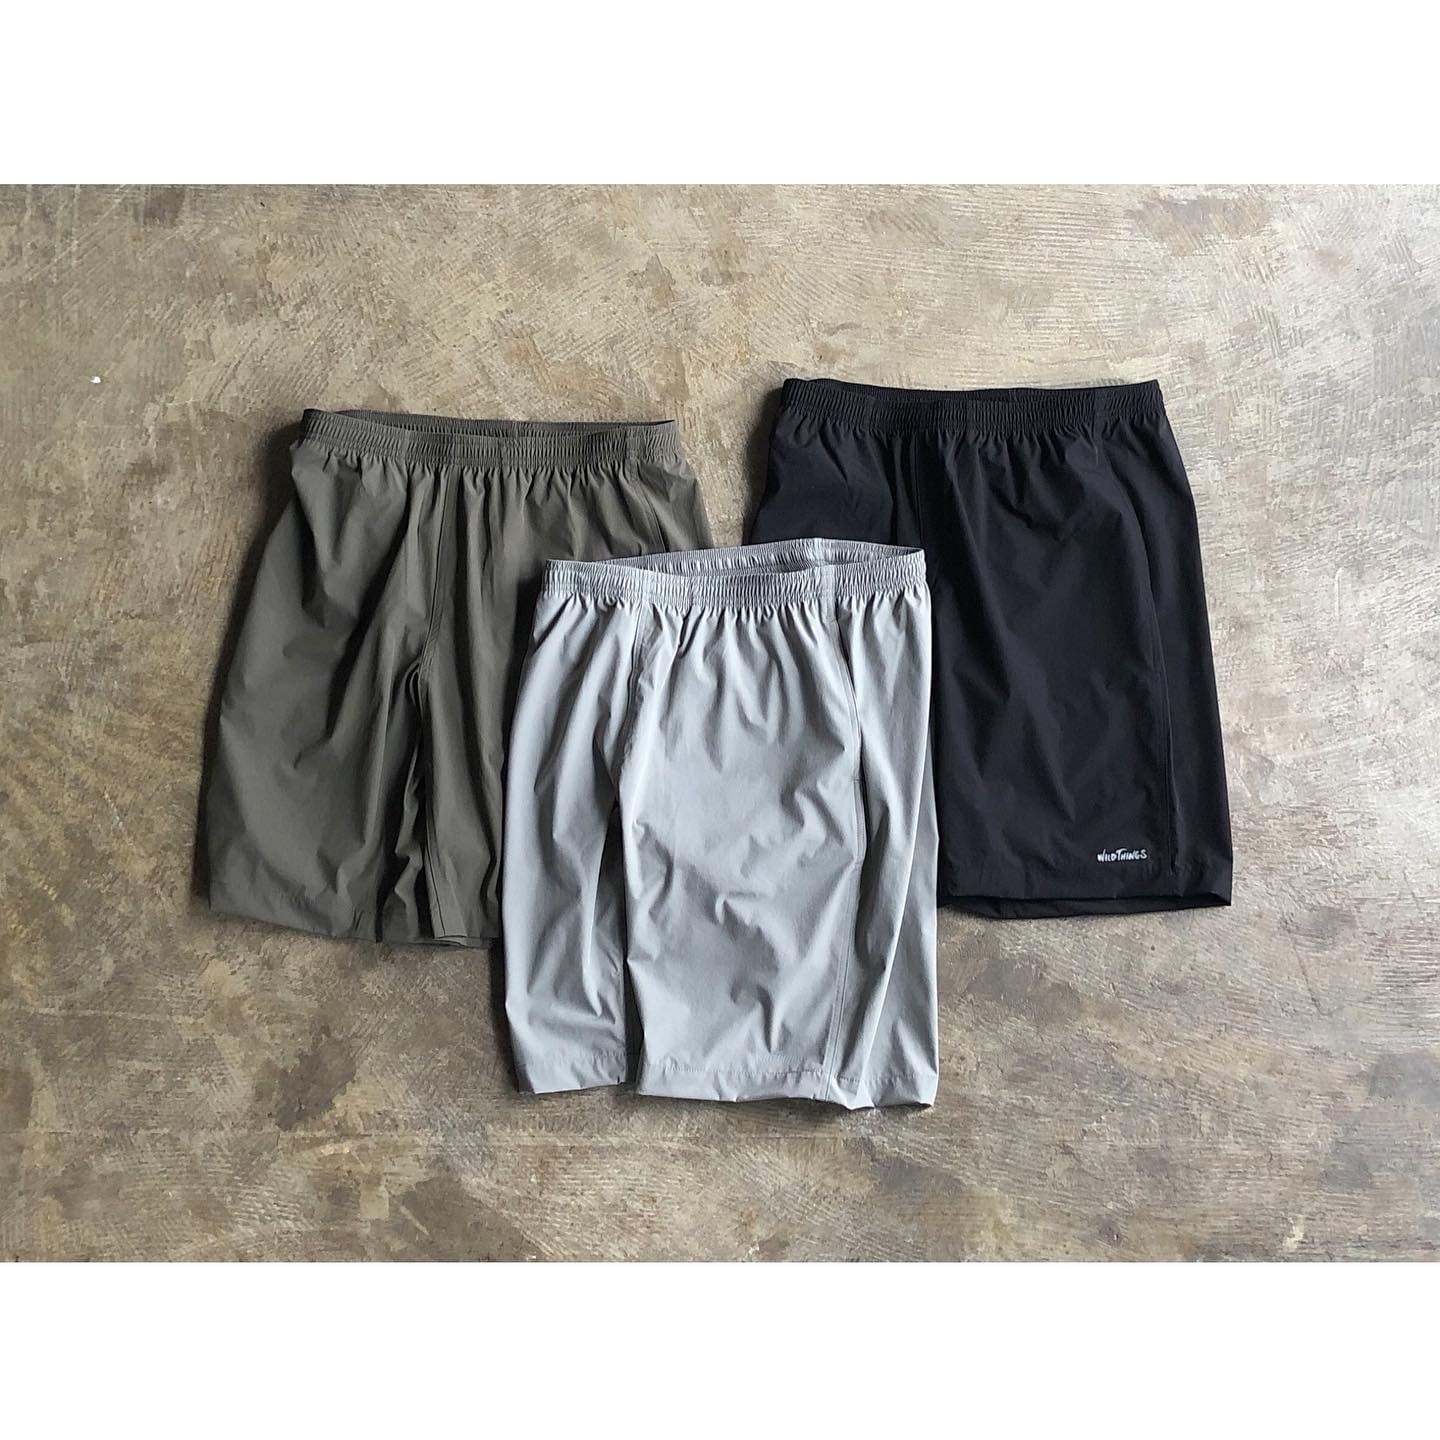 WILD THINGS(ワイルドシングス) Base Shorts | AUTHENTIC Life Store powered by BASE